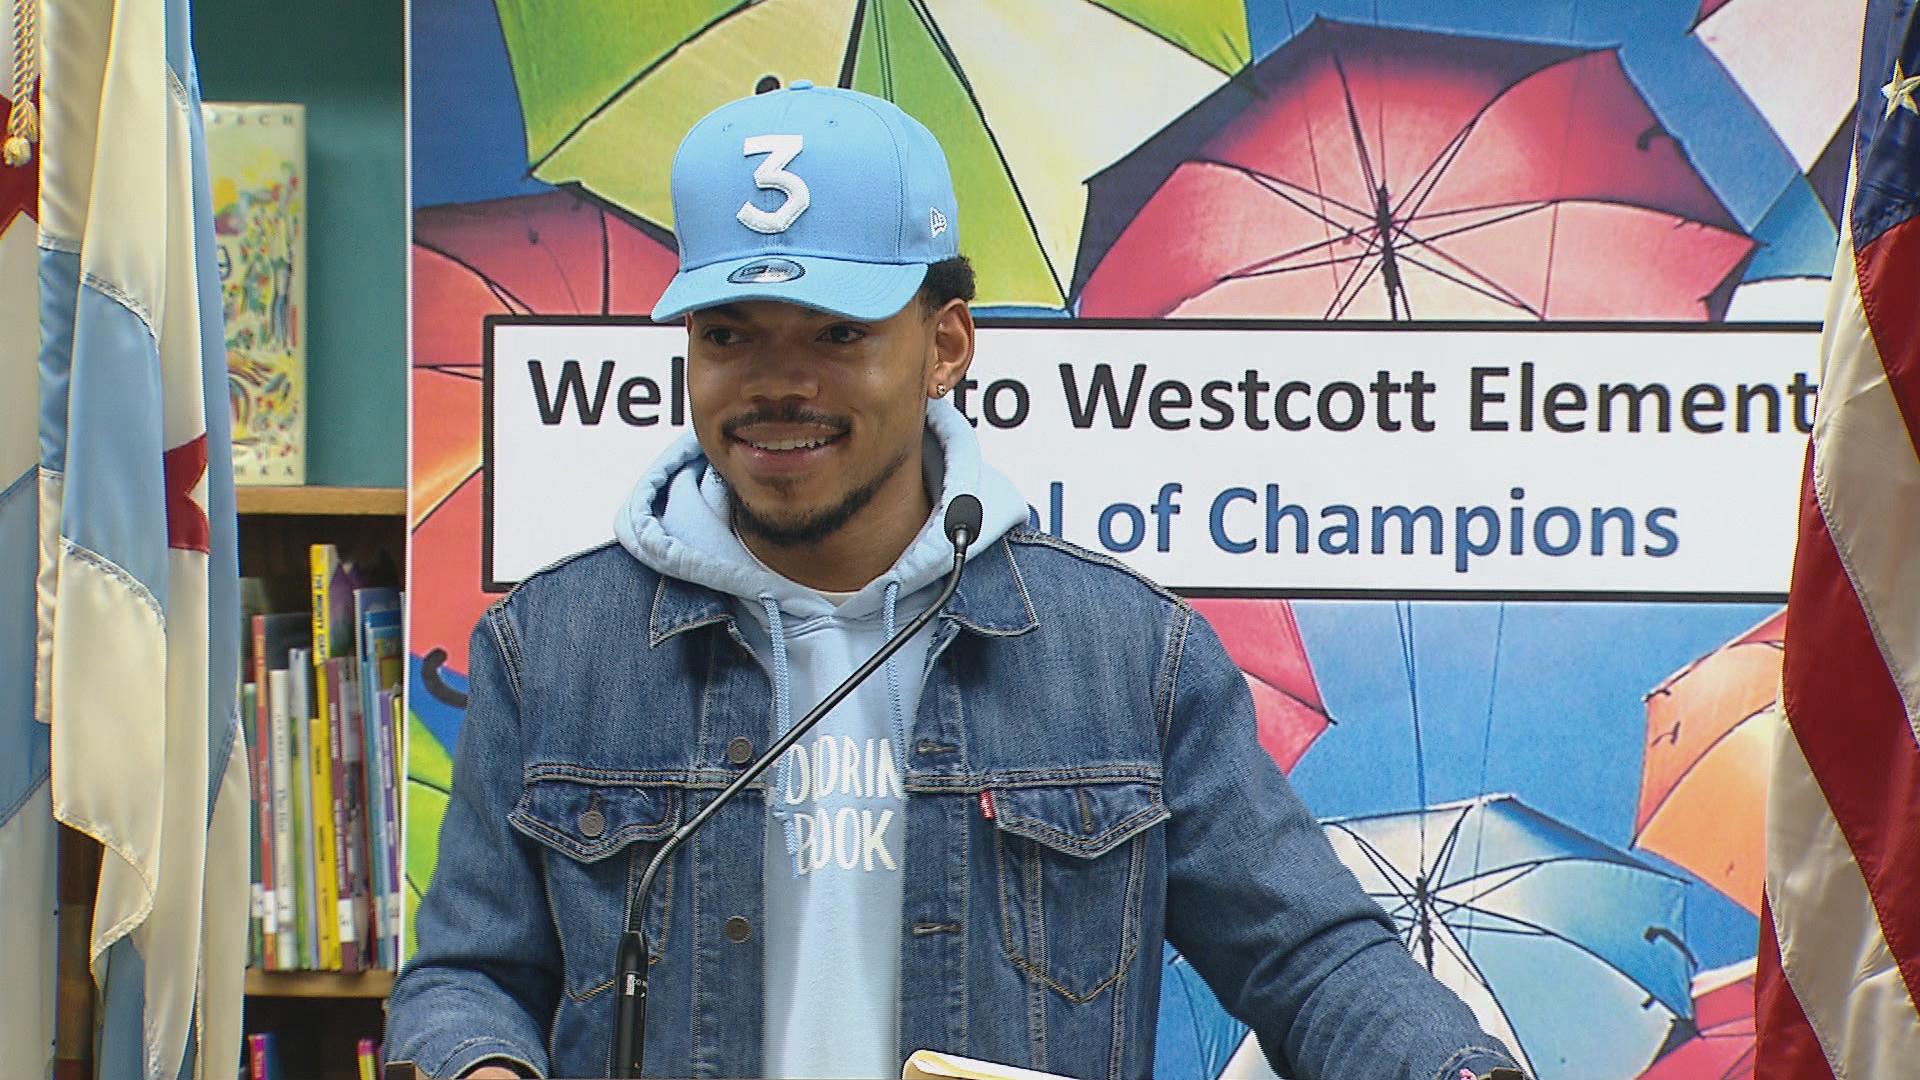 Chance the Rapper holds a press conference on March 6, 2017 at Westcott Elementary School to announce a  million donation to CPS. (Chicago Tonight)